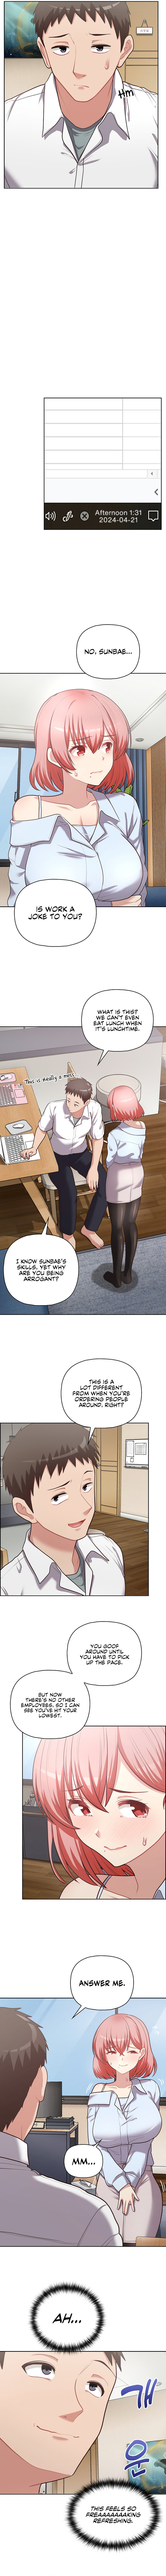 This Shithole Company is Mine Now! - Chapter 15 Page 6